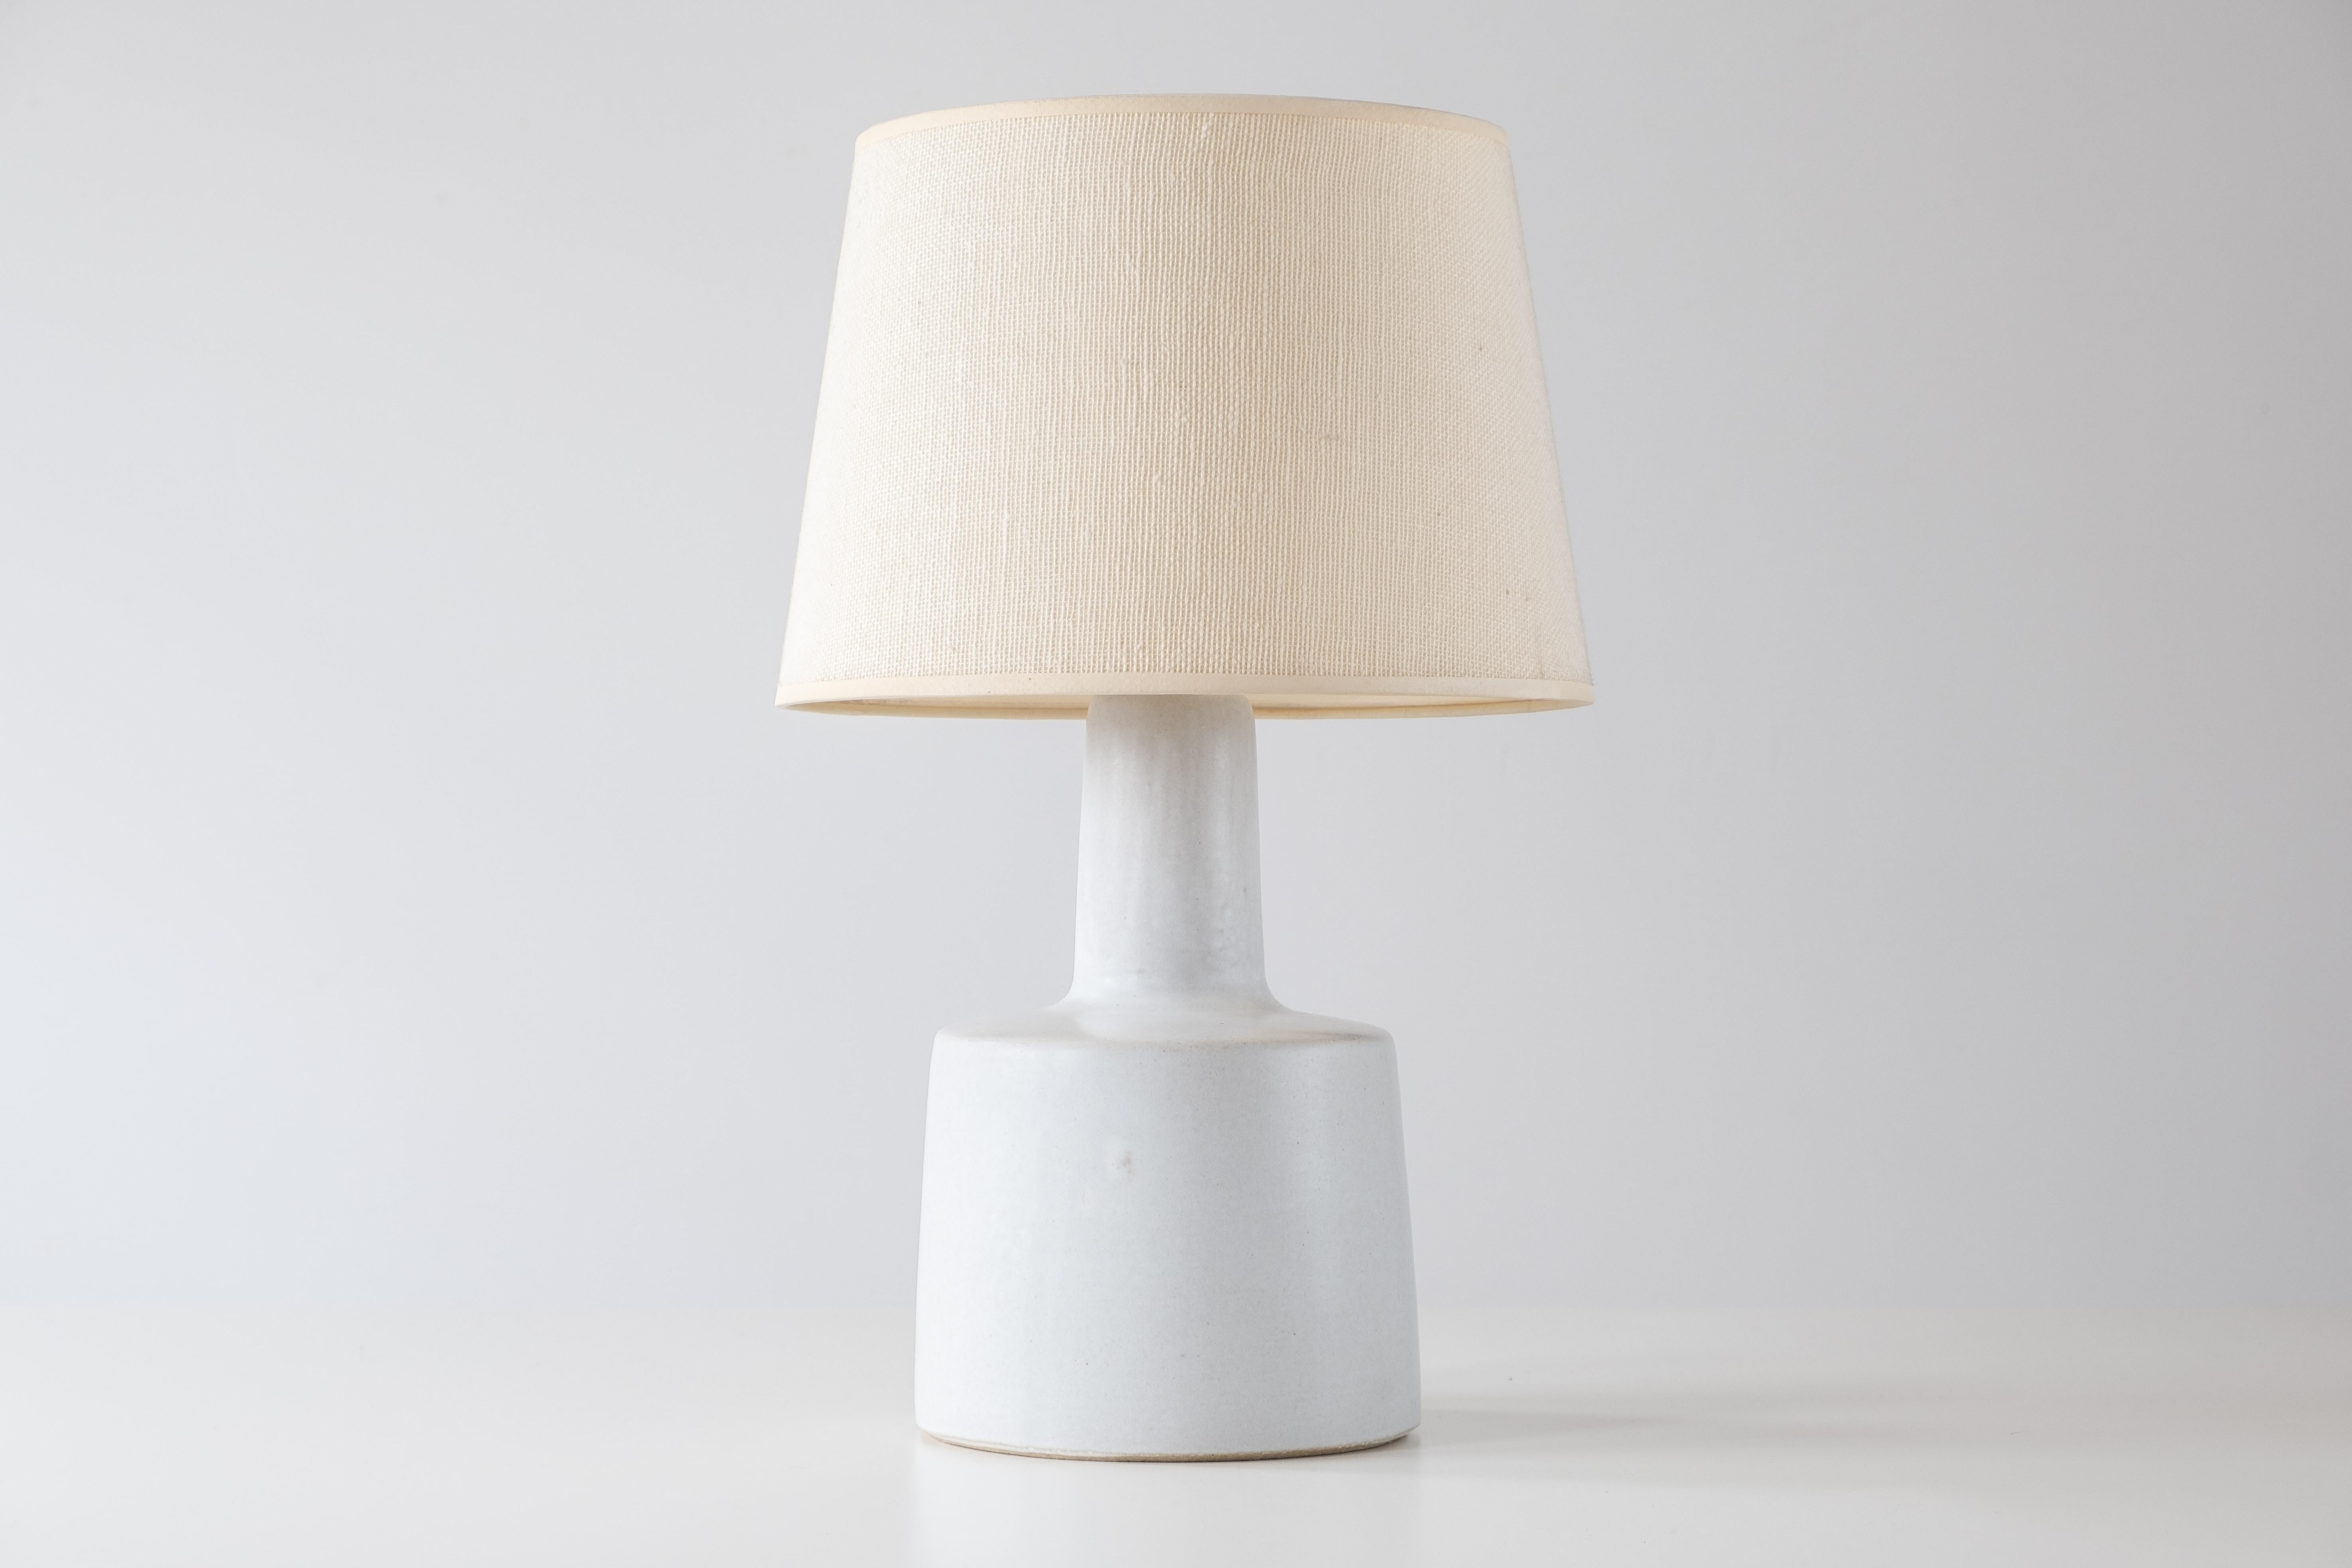 What is it?
—
Another gem from the masters of mid century lightning – Gordon and Jane Martz.

This signed Martz model 105 lamp comes in a semi-gloss white glaze with small flecks of red and blue. The lamp shows a small bit of texture from the clay